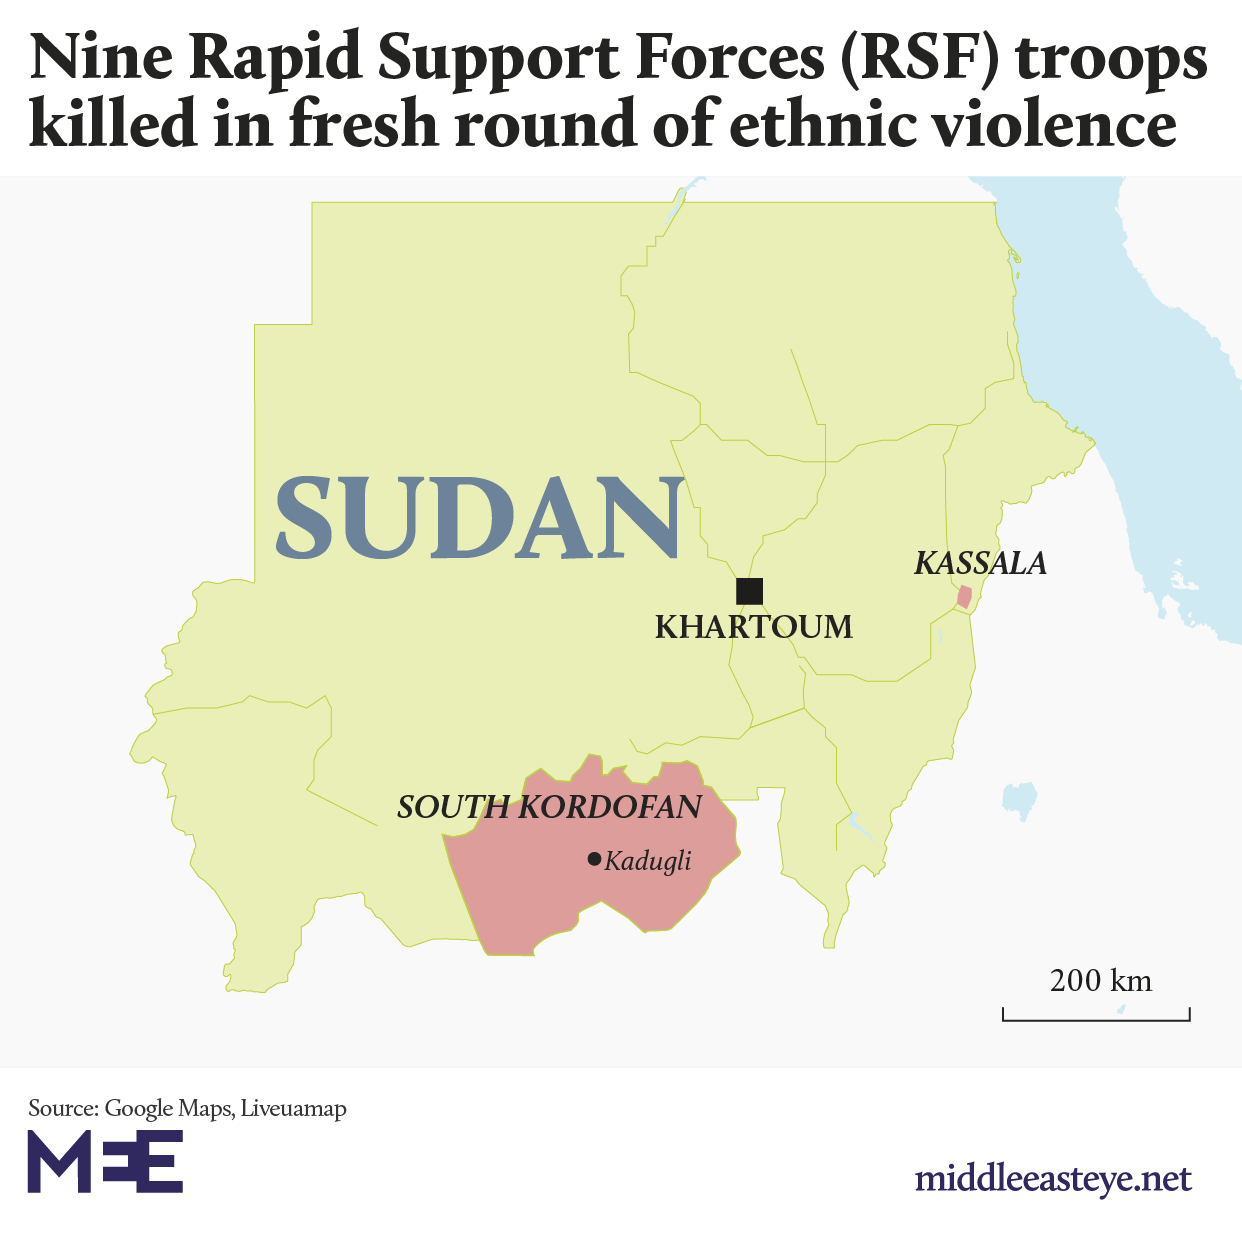 9 RSF troops were killed in South Kordofan, days after ethnic clashes in Kassala